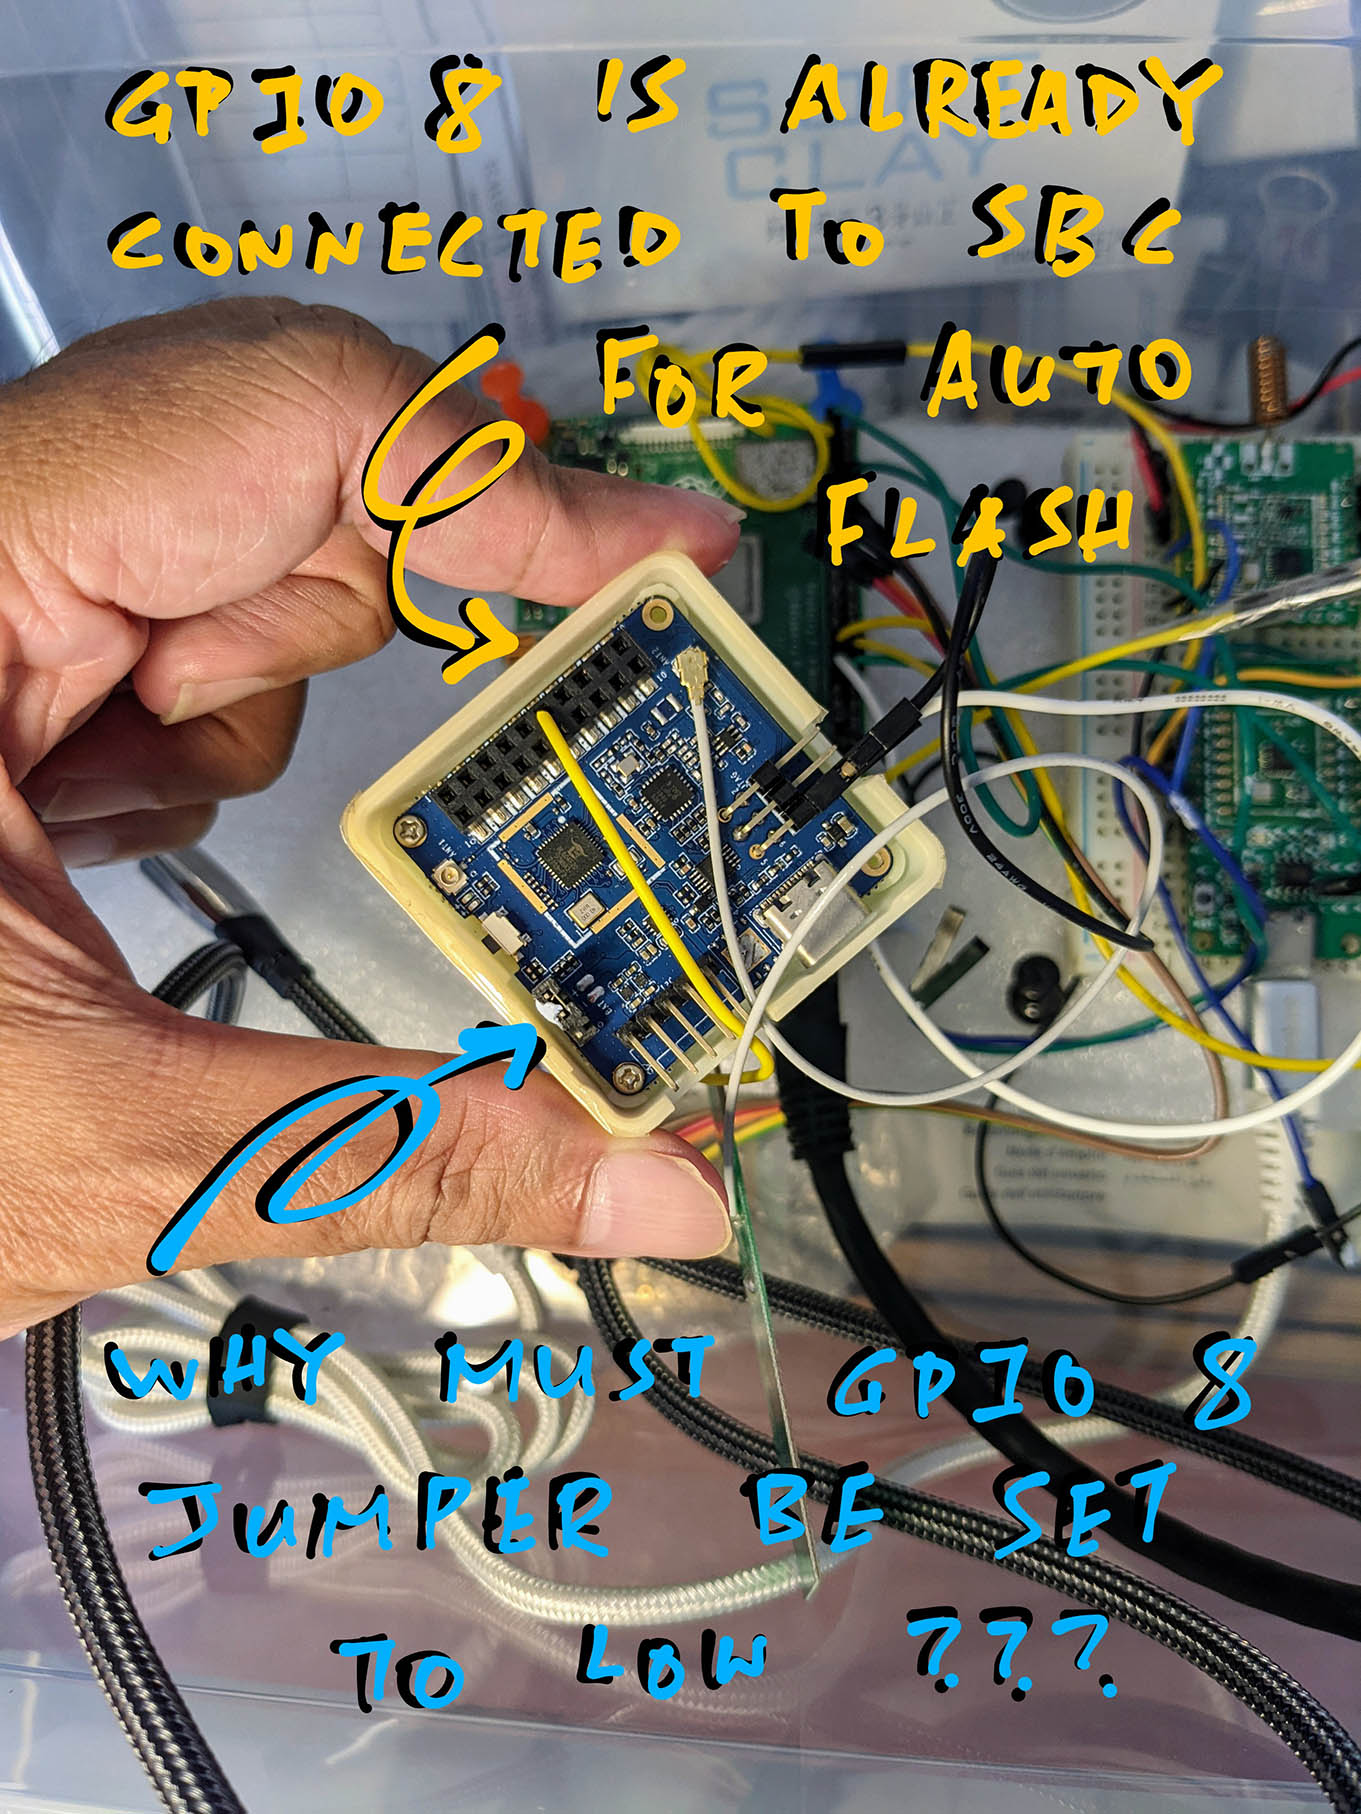 GPIO 8 Jumper must be set to Low (Non-Flashing Mode)